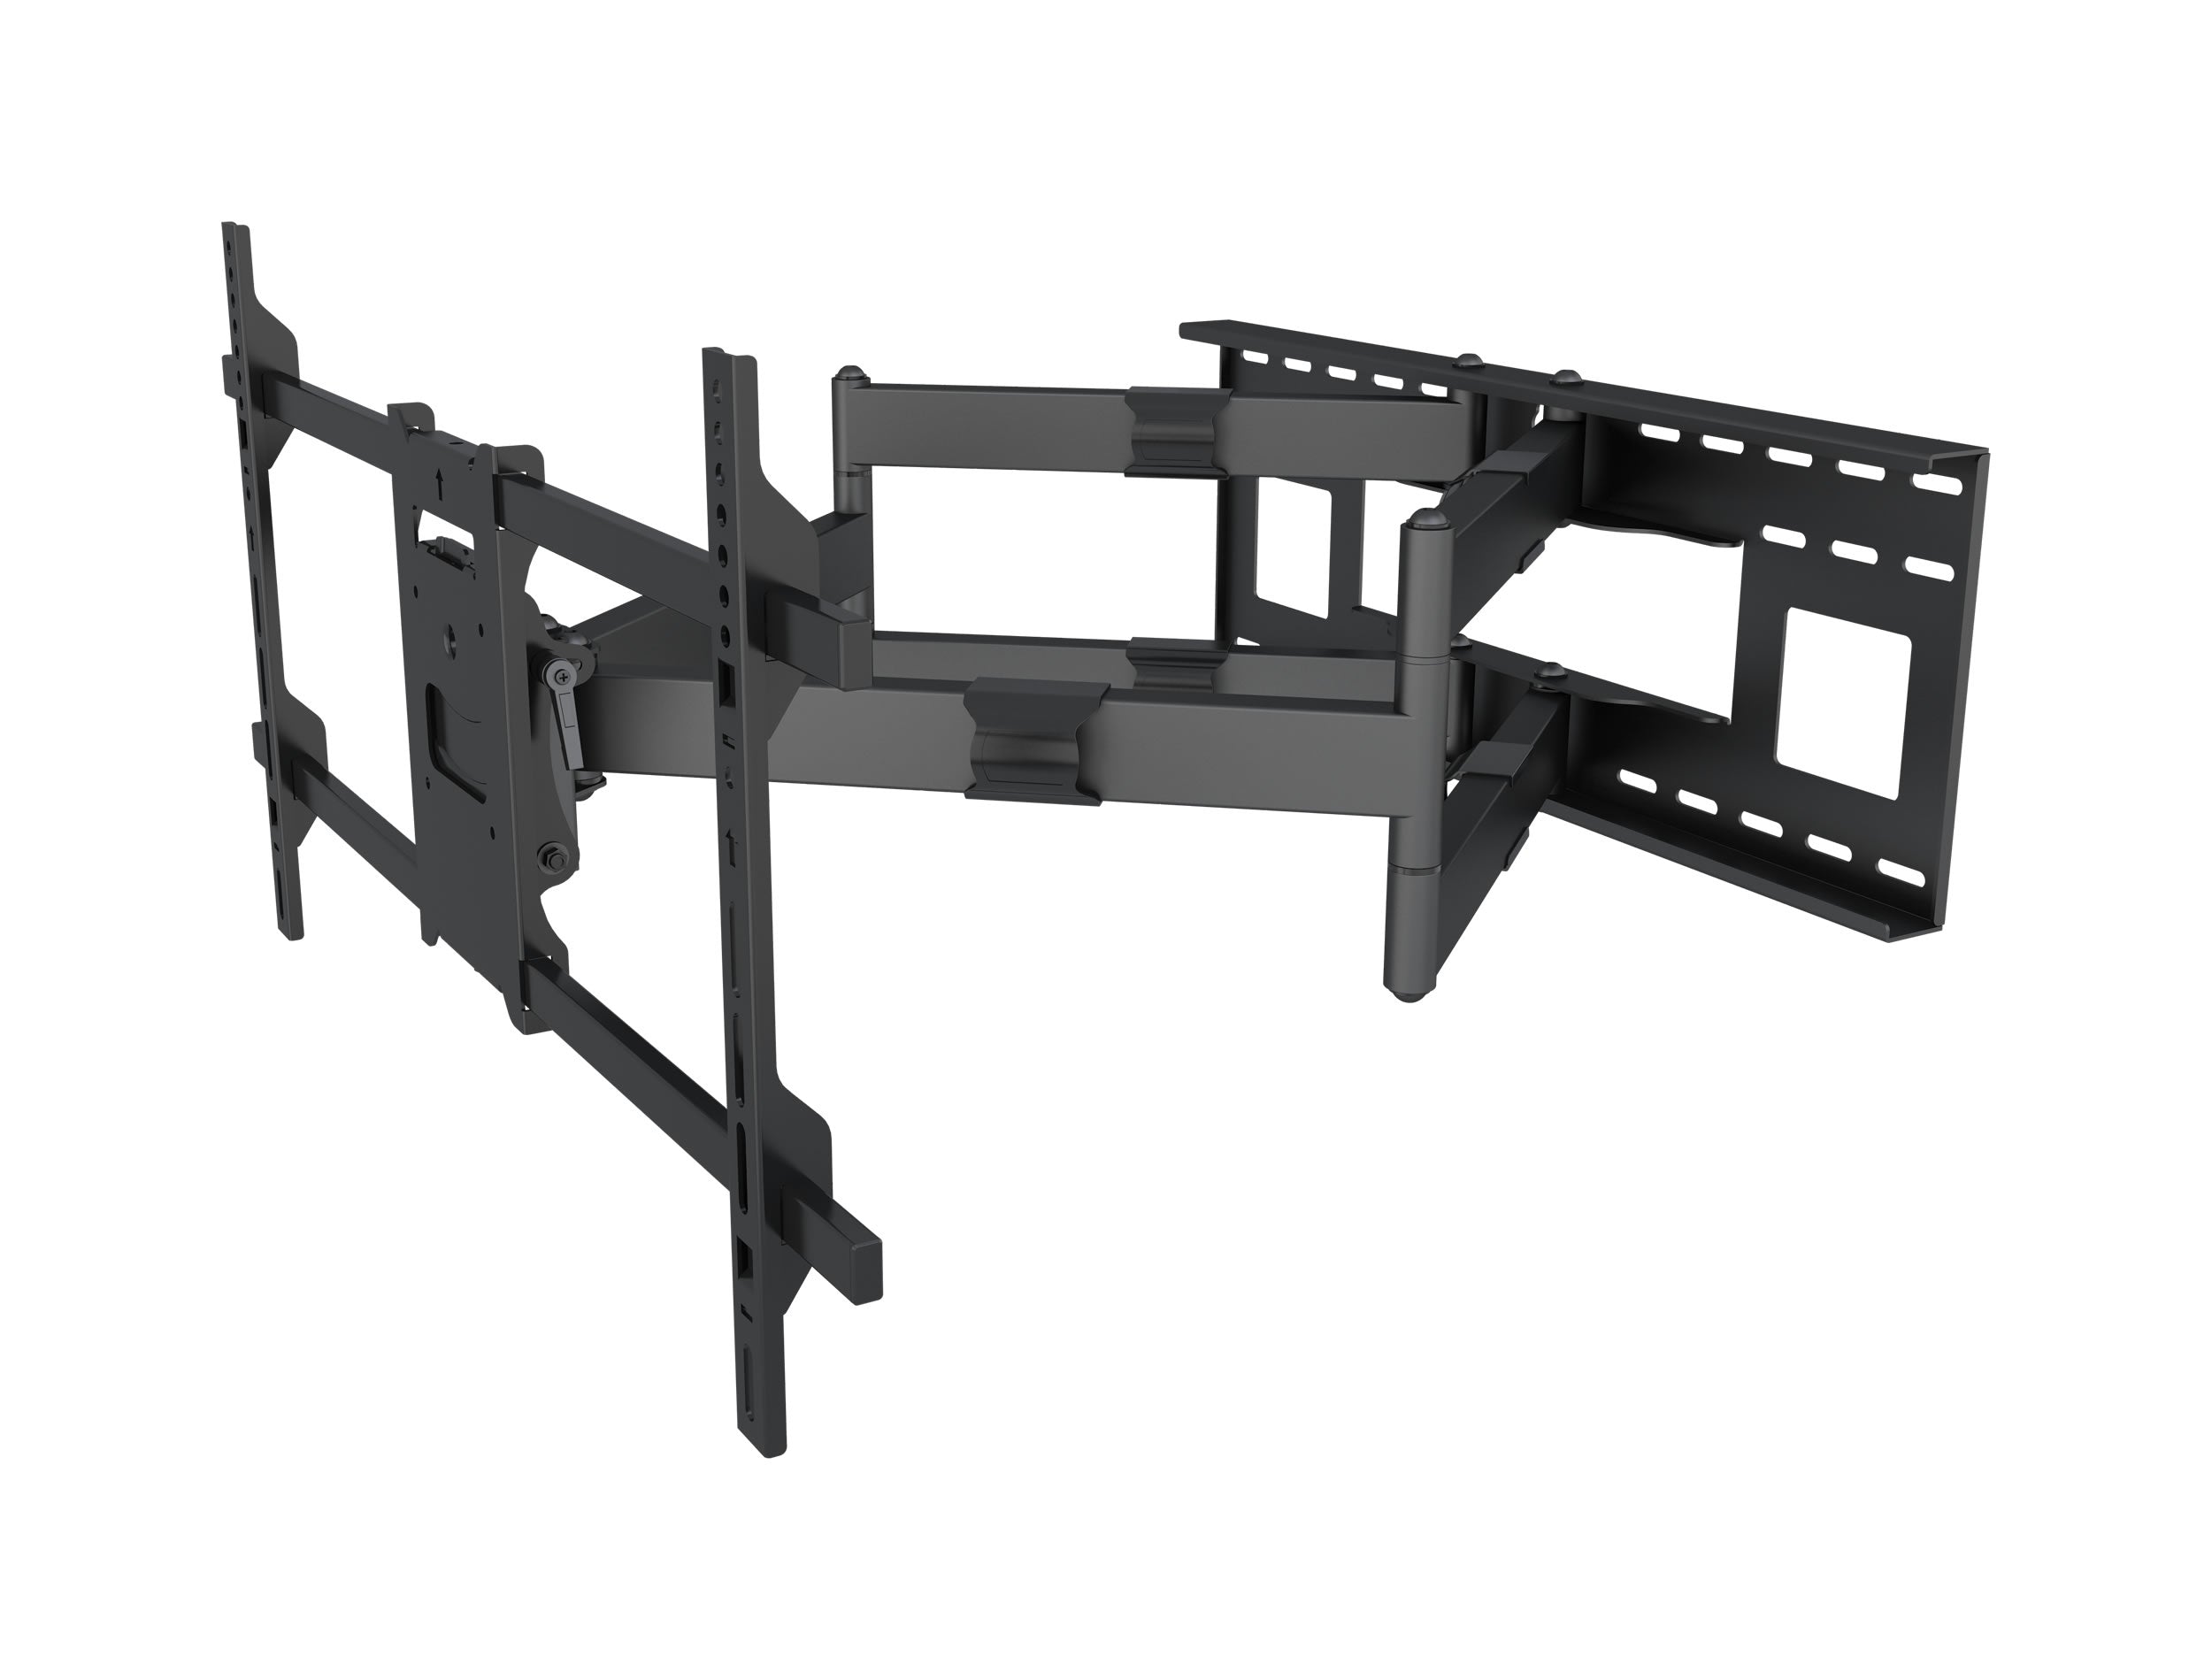 64-1152XLL Full motion Flat LCD LED TV / Panels Wall Mount Bracket for 42-90 inches Screens